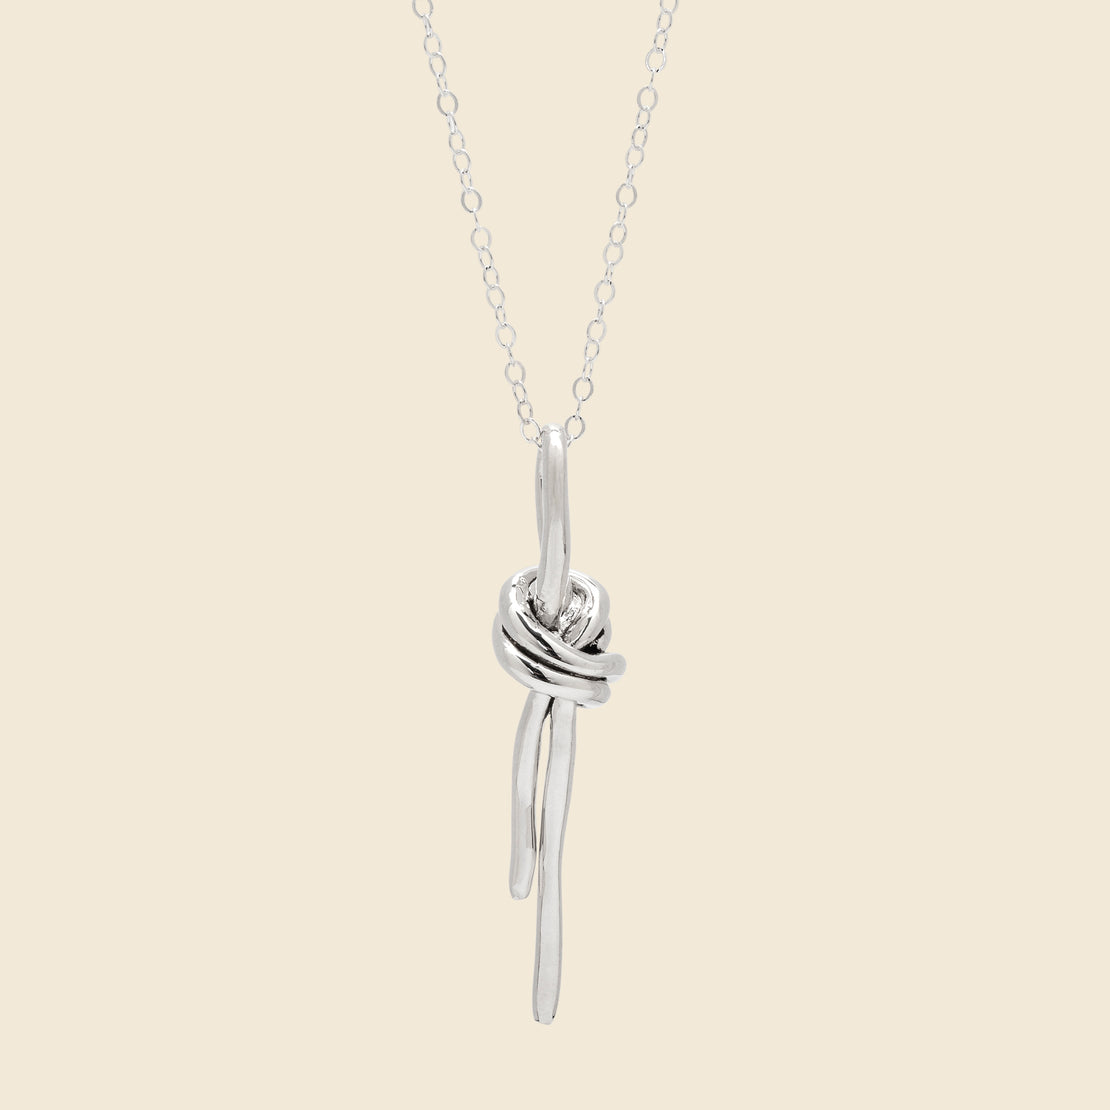 8.6.4 Design Knot Charm Necklace - Sterling Silver